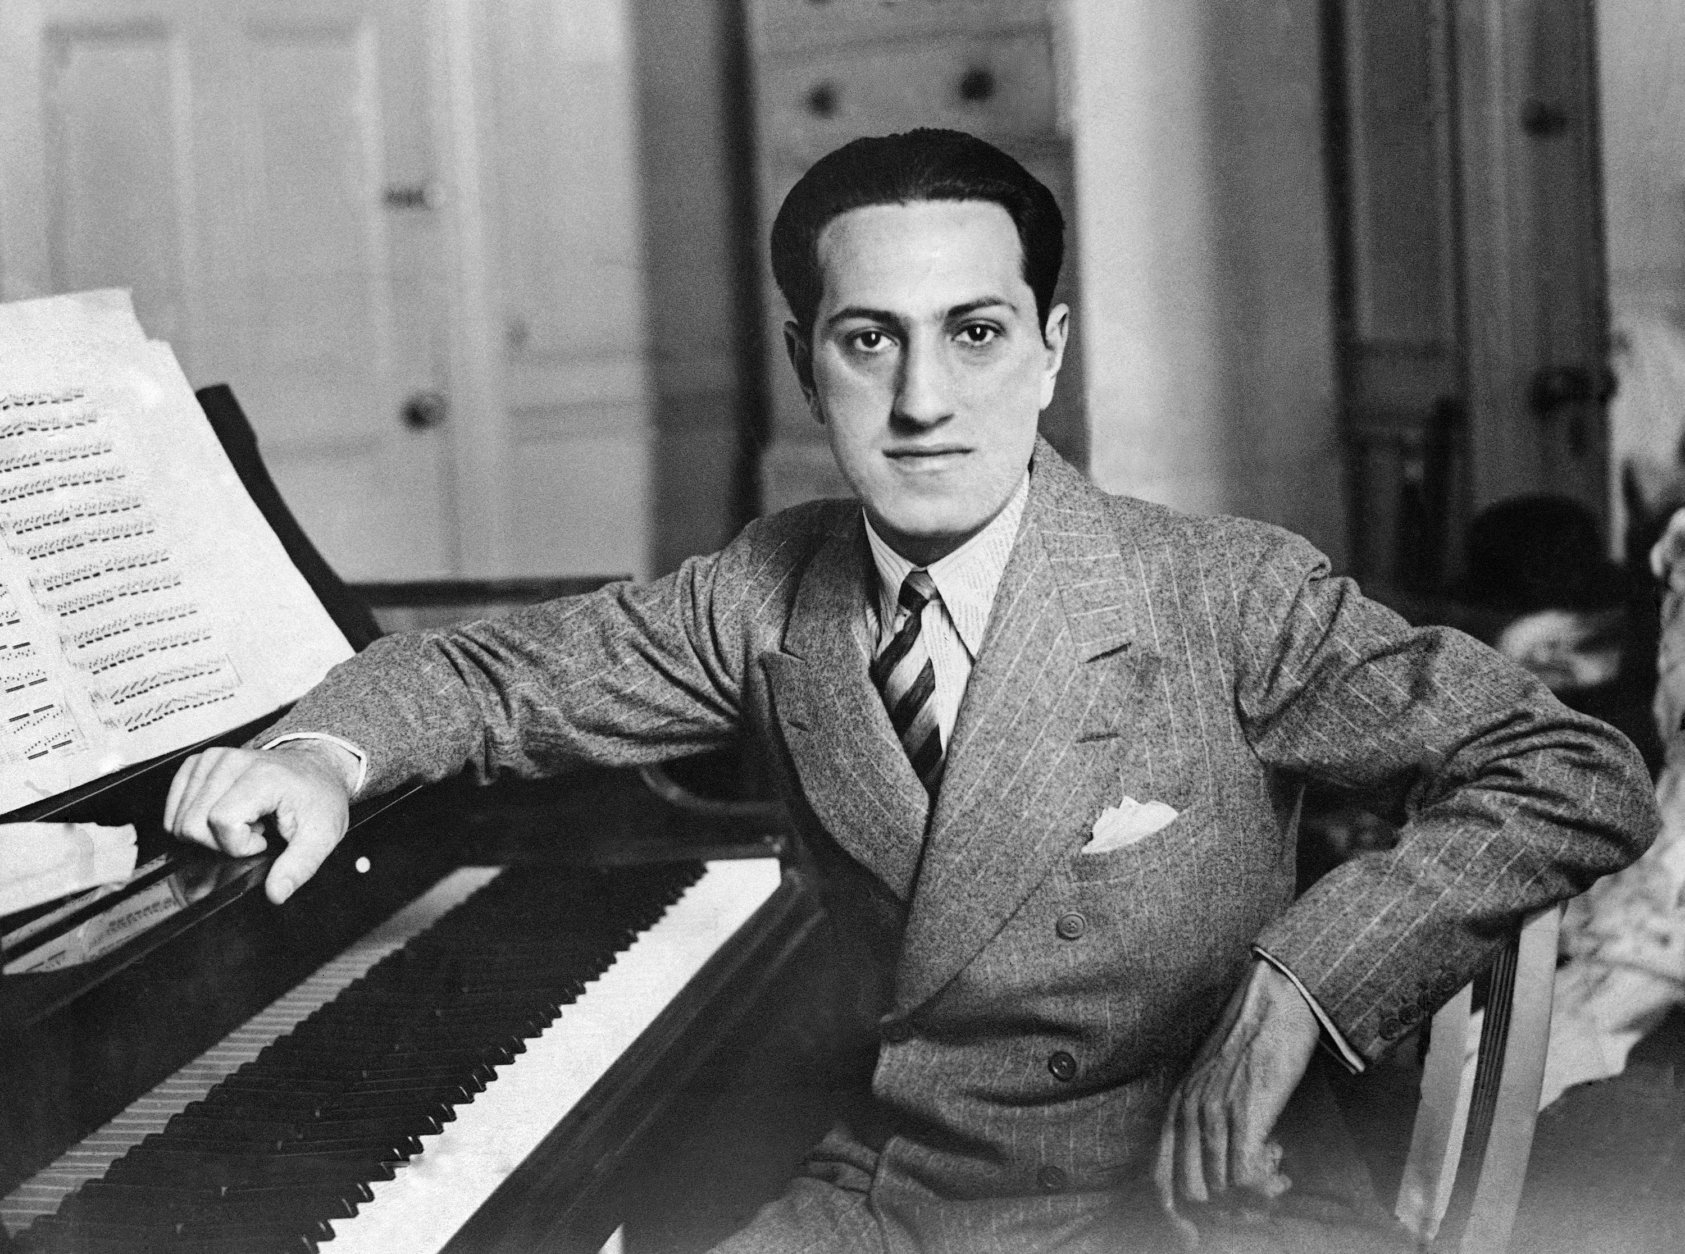 George Gershwin, the modern composer best-known for his Rhapsody in Blue, died in hospital in Hollywood on July 11 after an operation for tumor on the brain. He was 39. George Gershwin shown in file photo, July 12, 1937. (AP Photo)